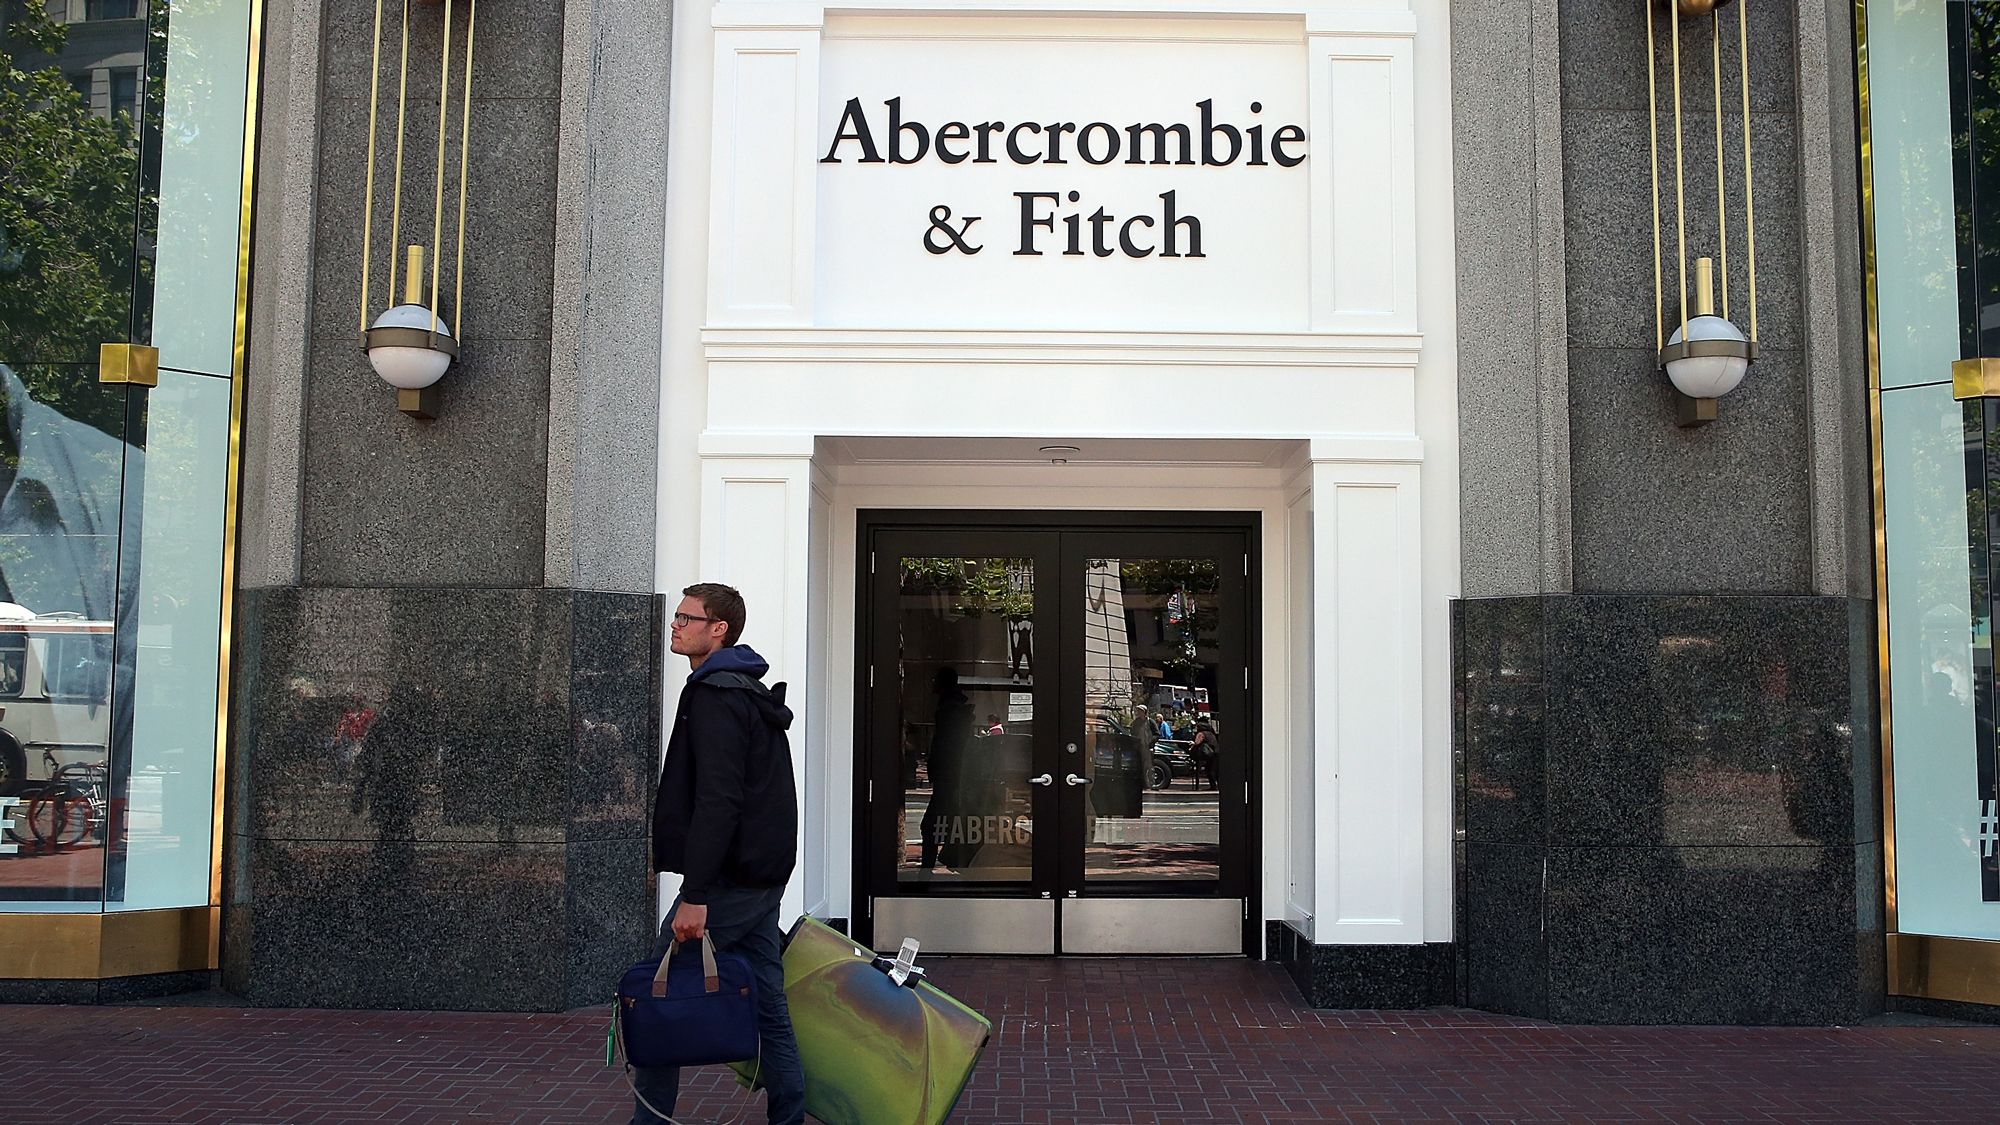 Abercrombie & Fitch reports fiscal first quarter earnings for 2019